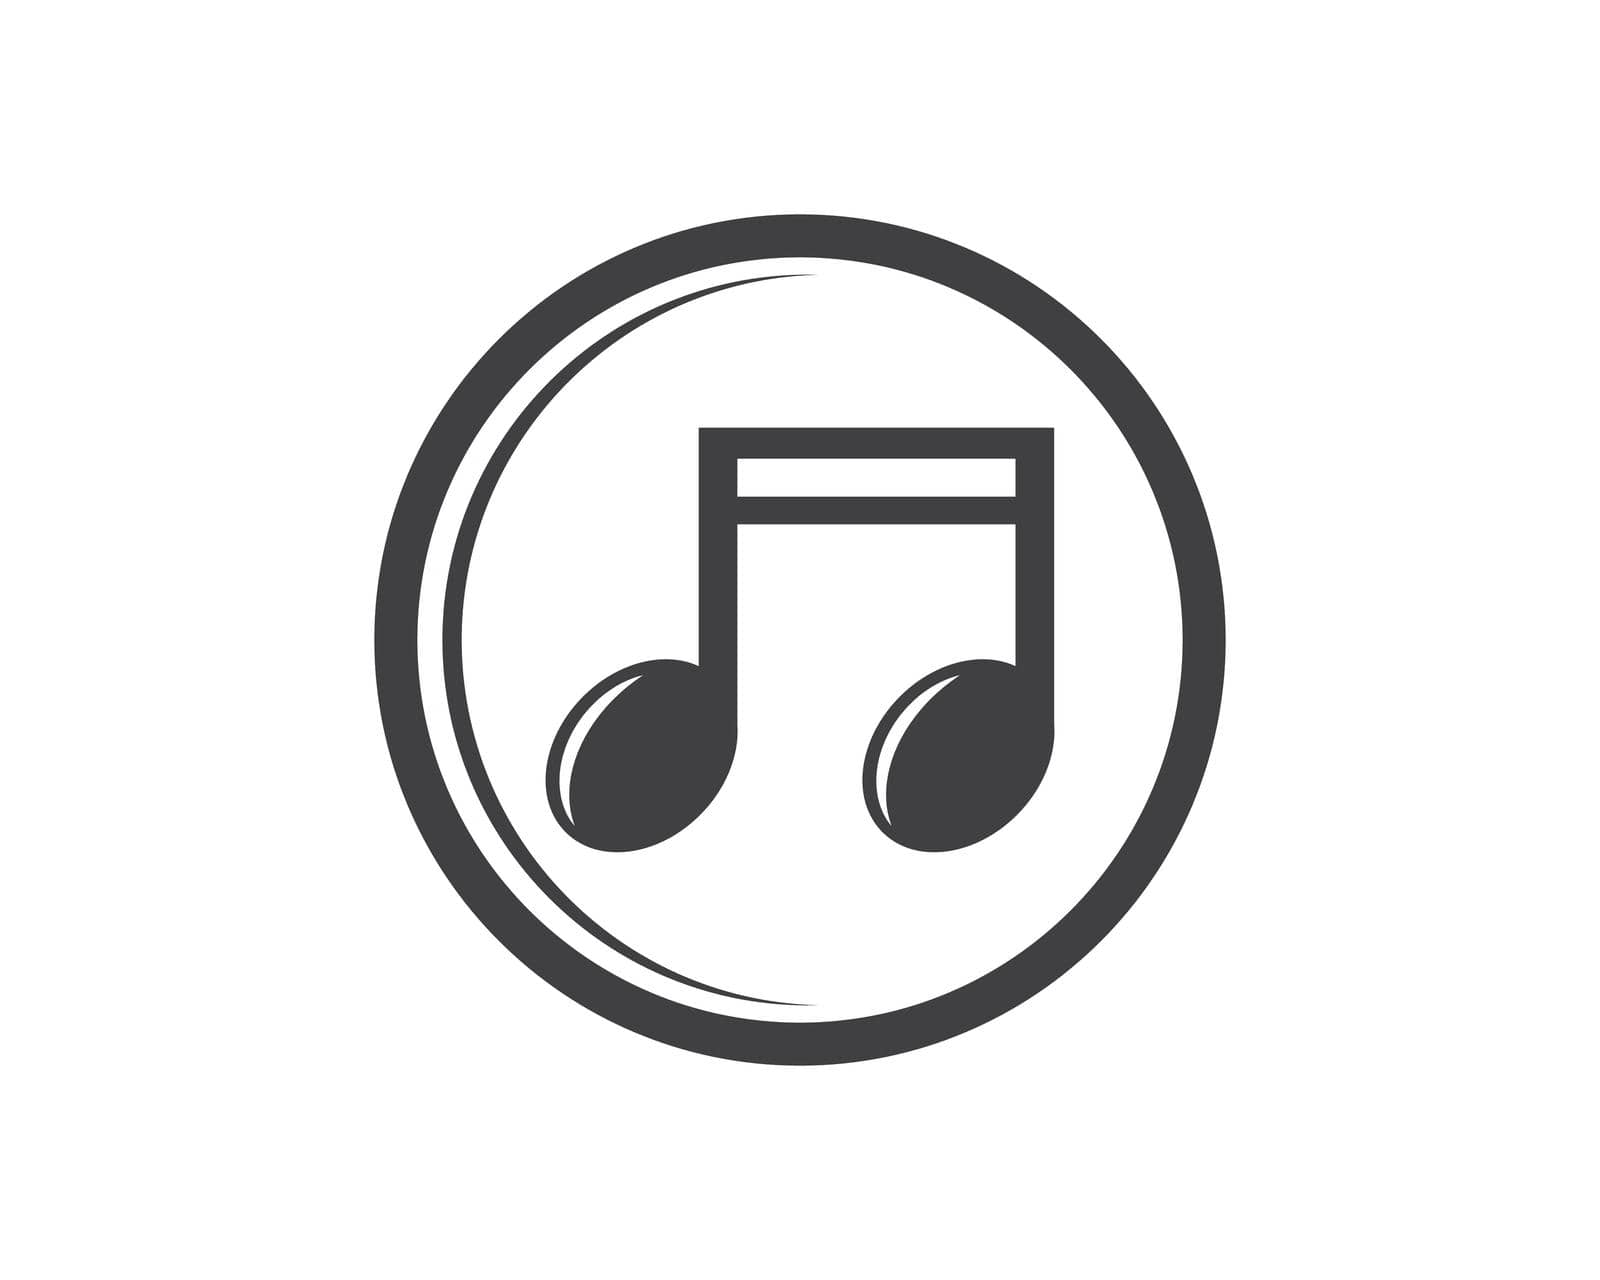 music note vector illustration icon by idan